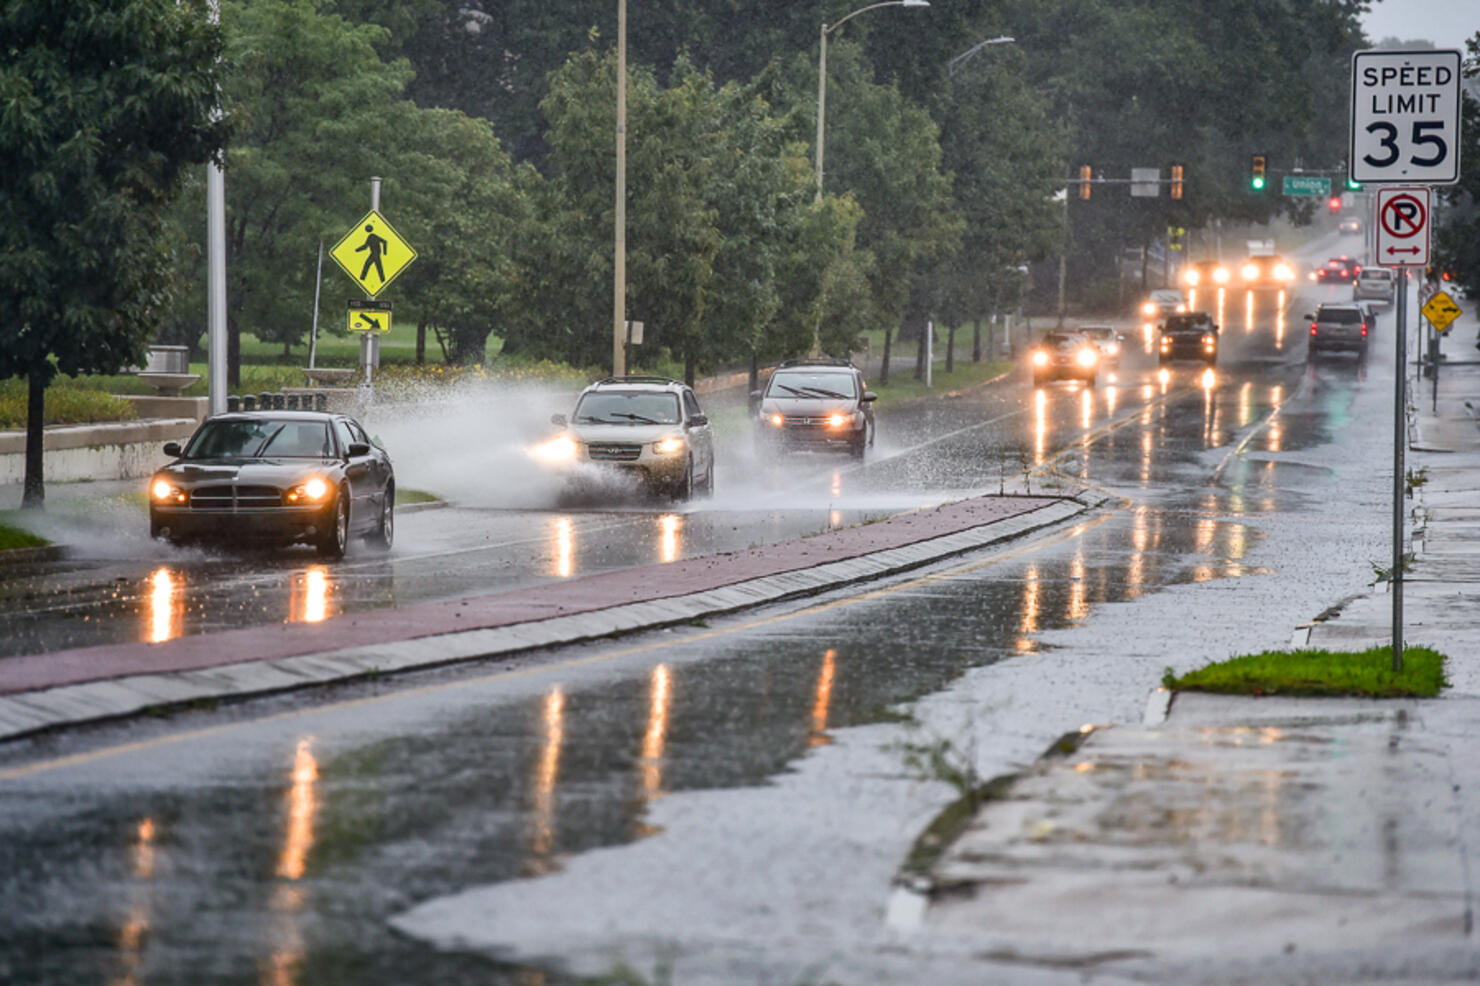 Vehicles drive through puddled waters on River street in